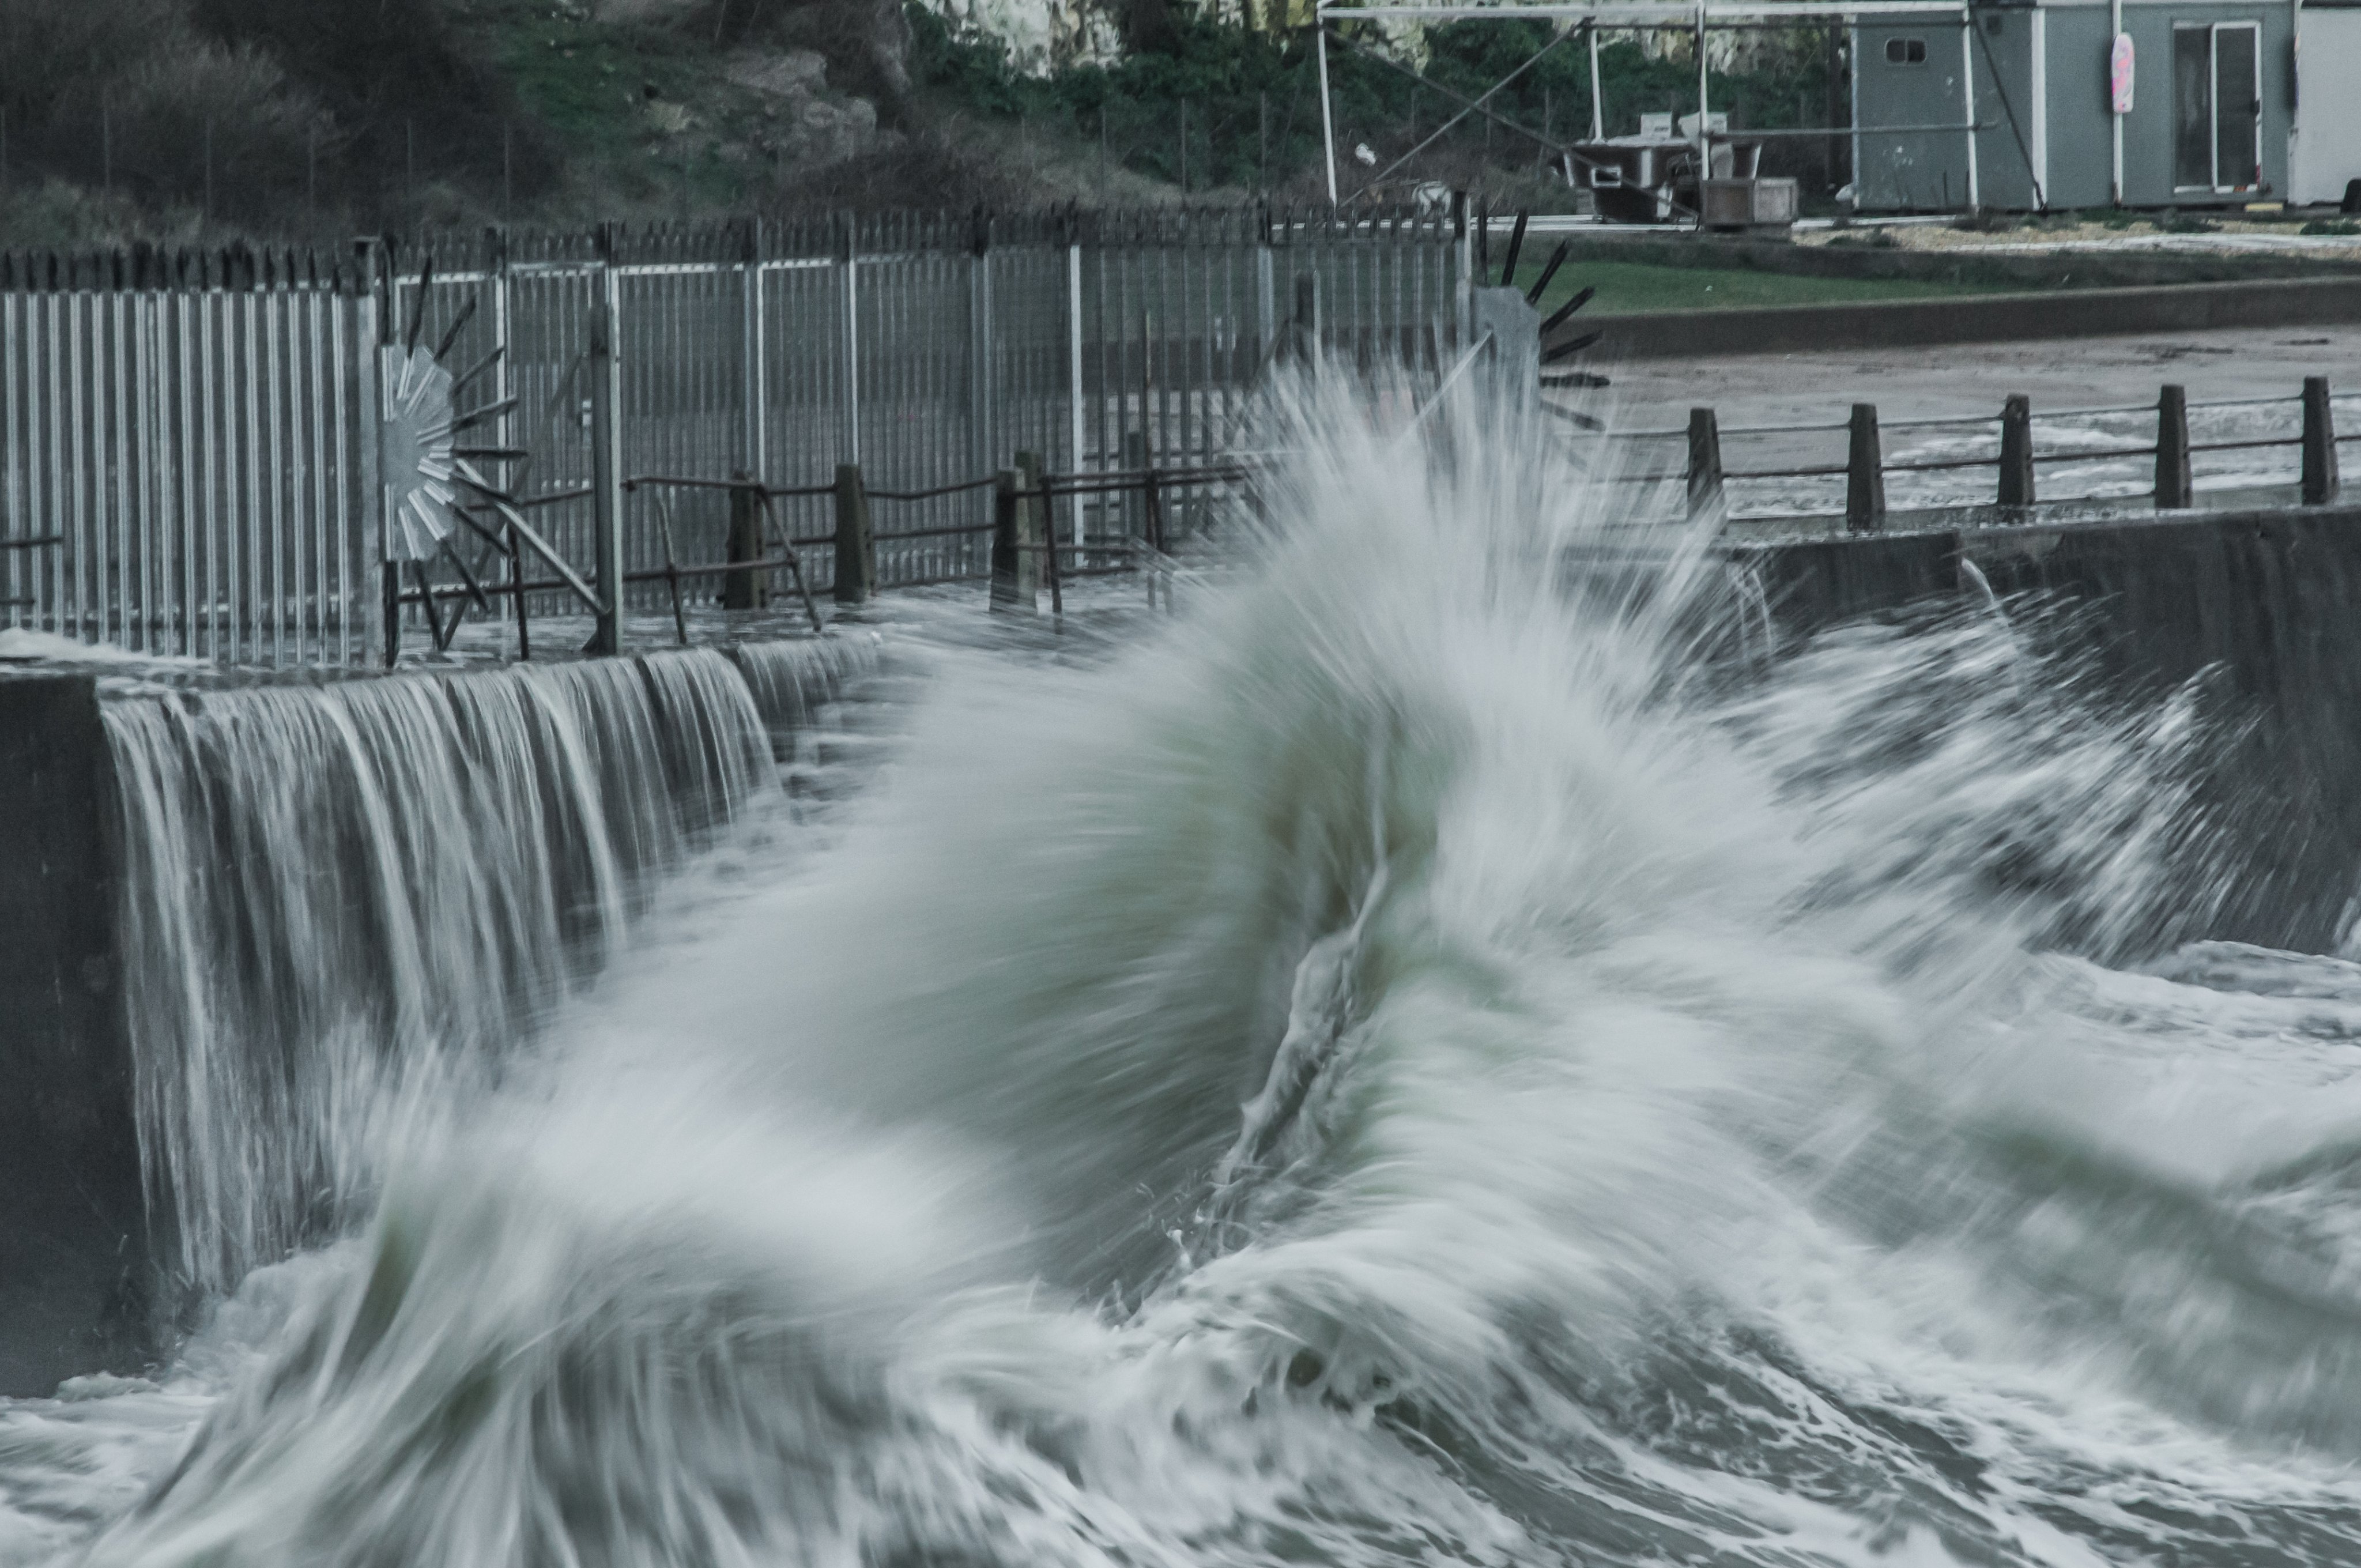 Waves in the harbour entrance at West Beach, Newhaven, Sussex UK by David George Burr @Bur1Burr